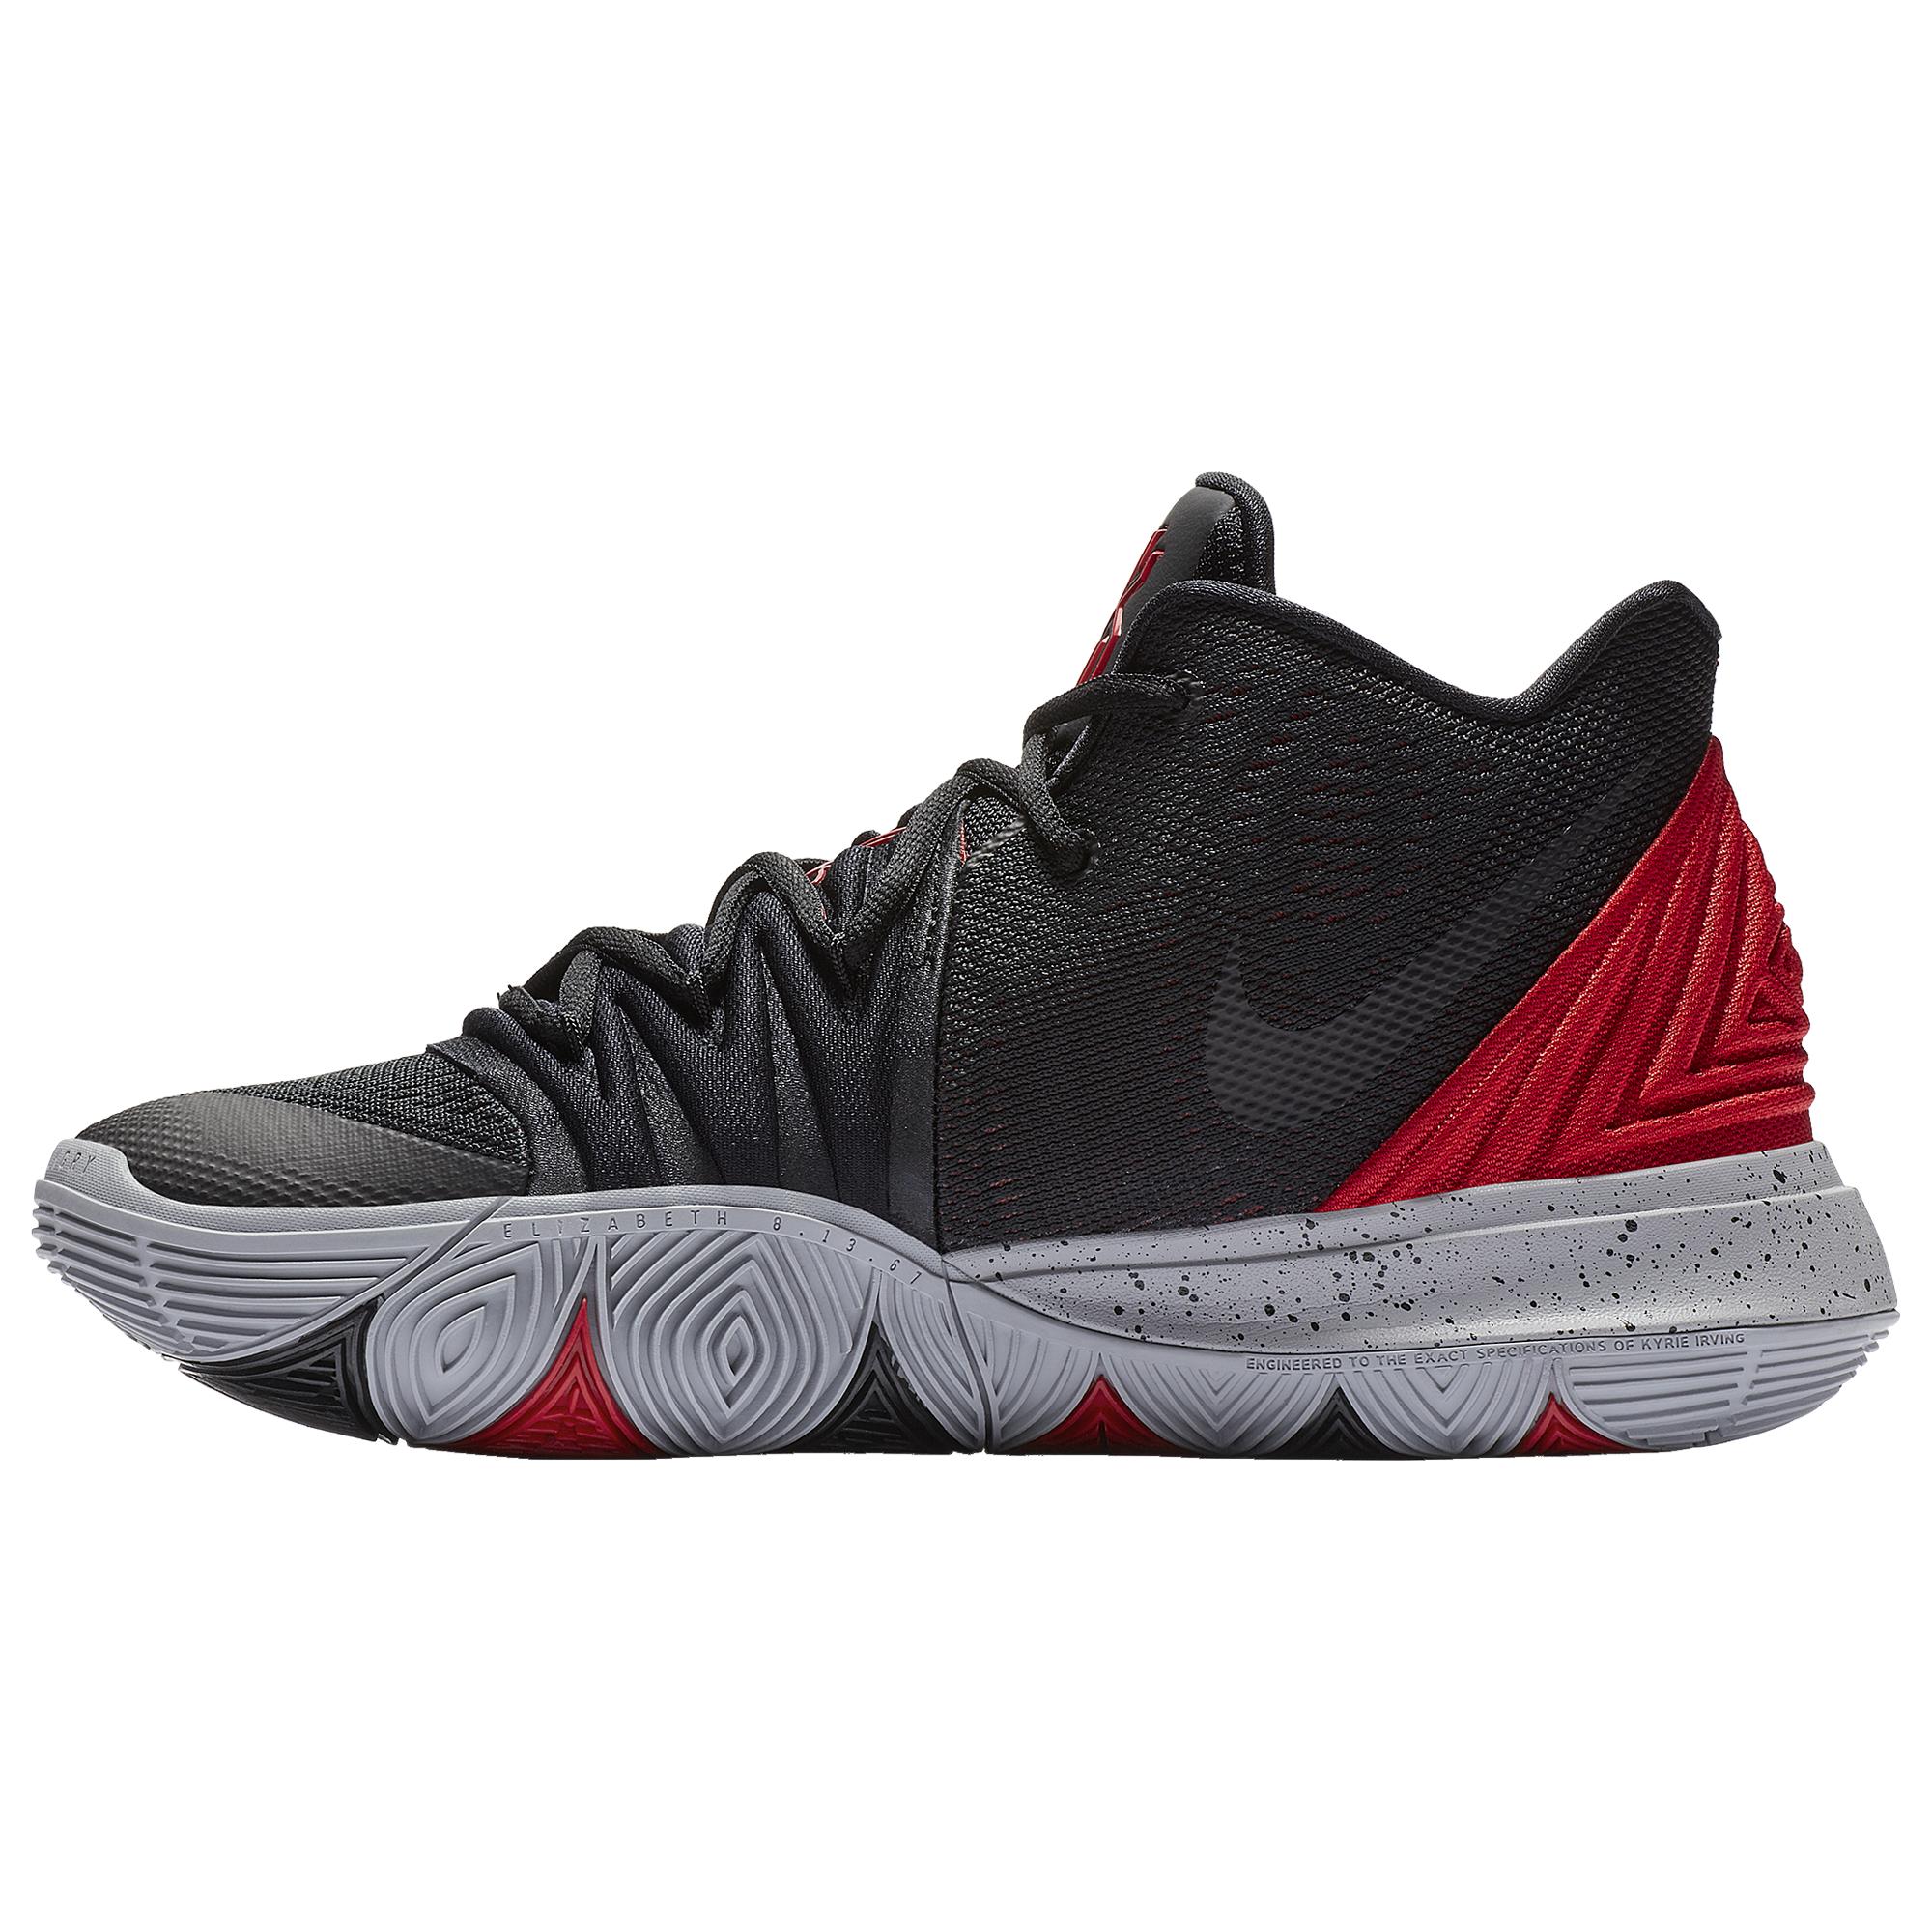 Nike Lace Kyrie 5 Basketball Shoes in 